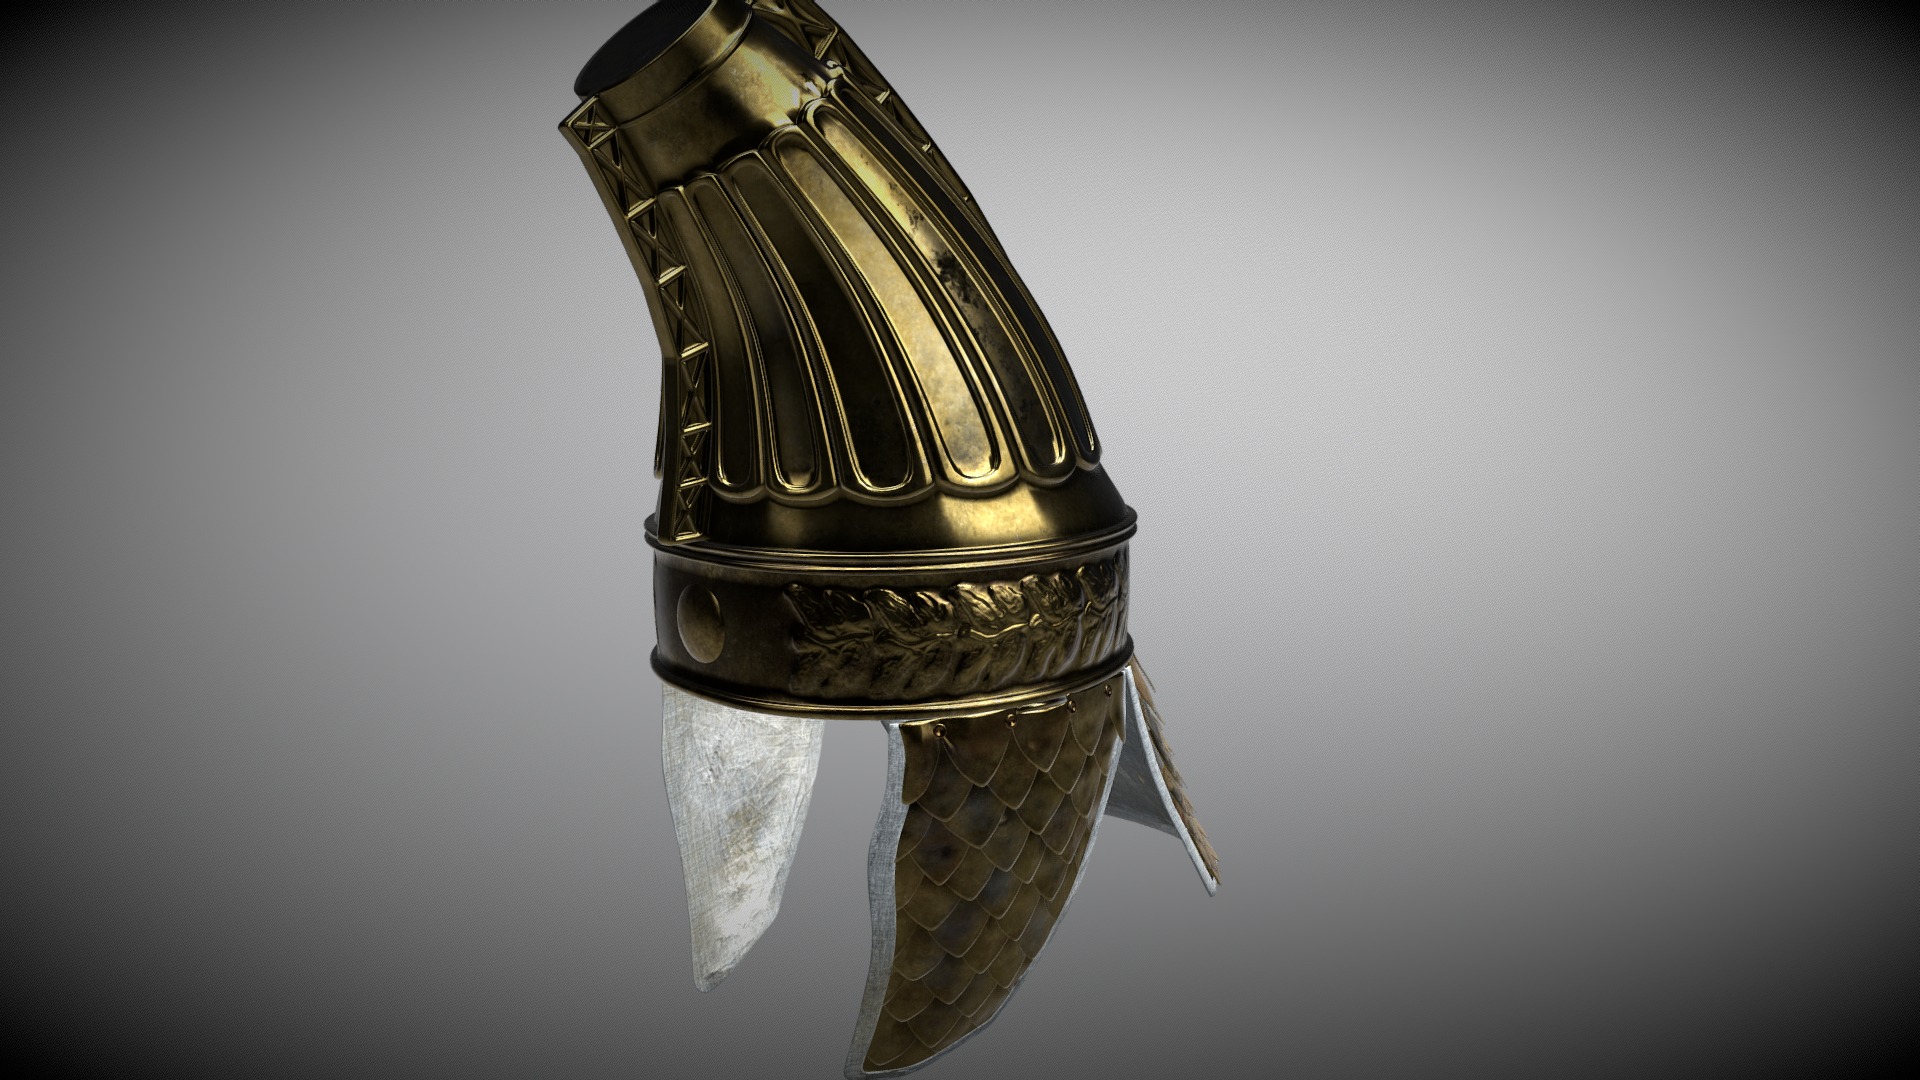 3D model Casco Dacio /Dacian helmet - This is a 3D model of the Casco Dacio /Dacian helmet. The 3D model is about a silver and gold watch.